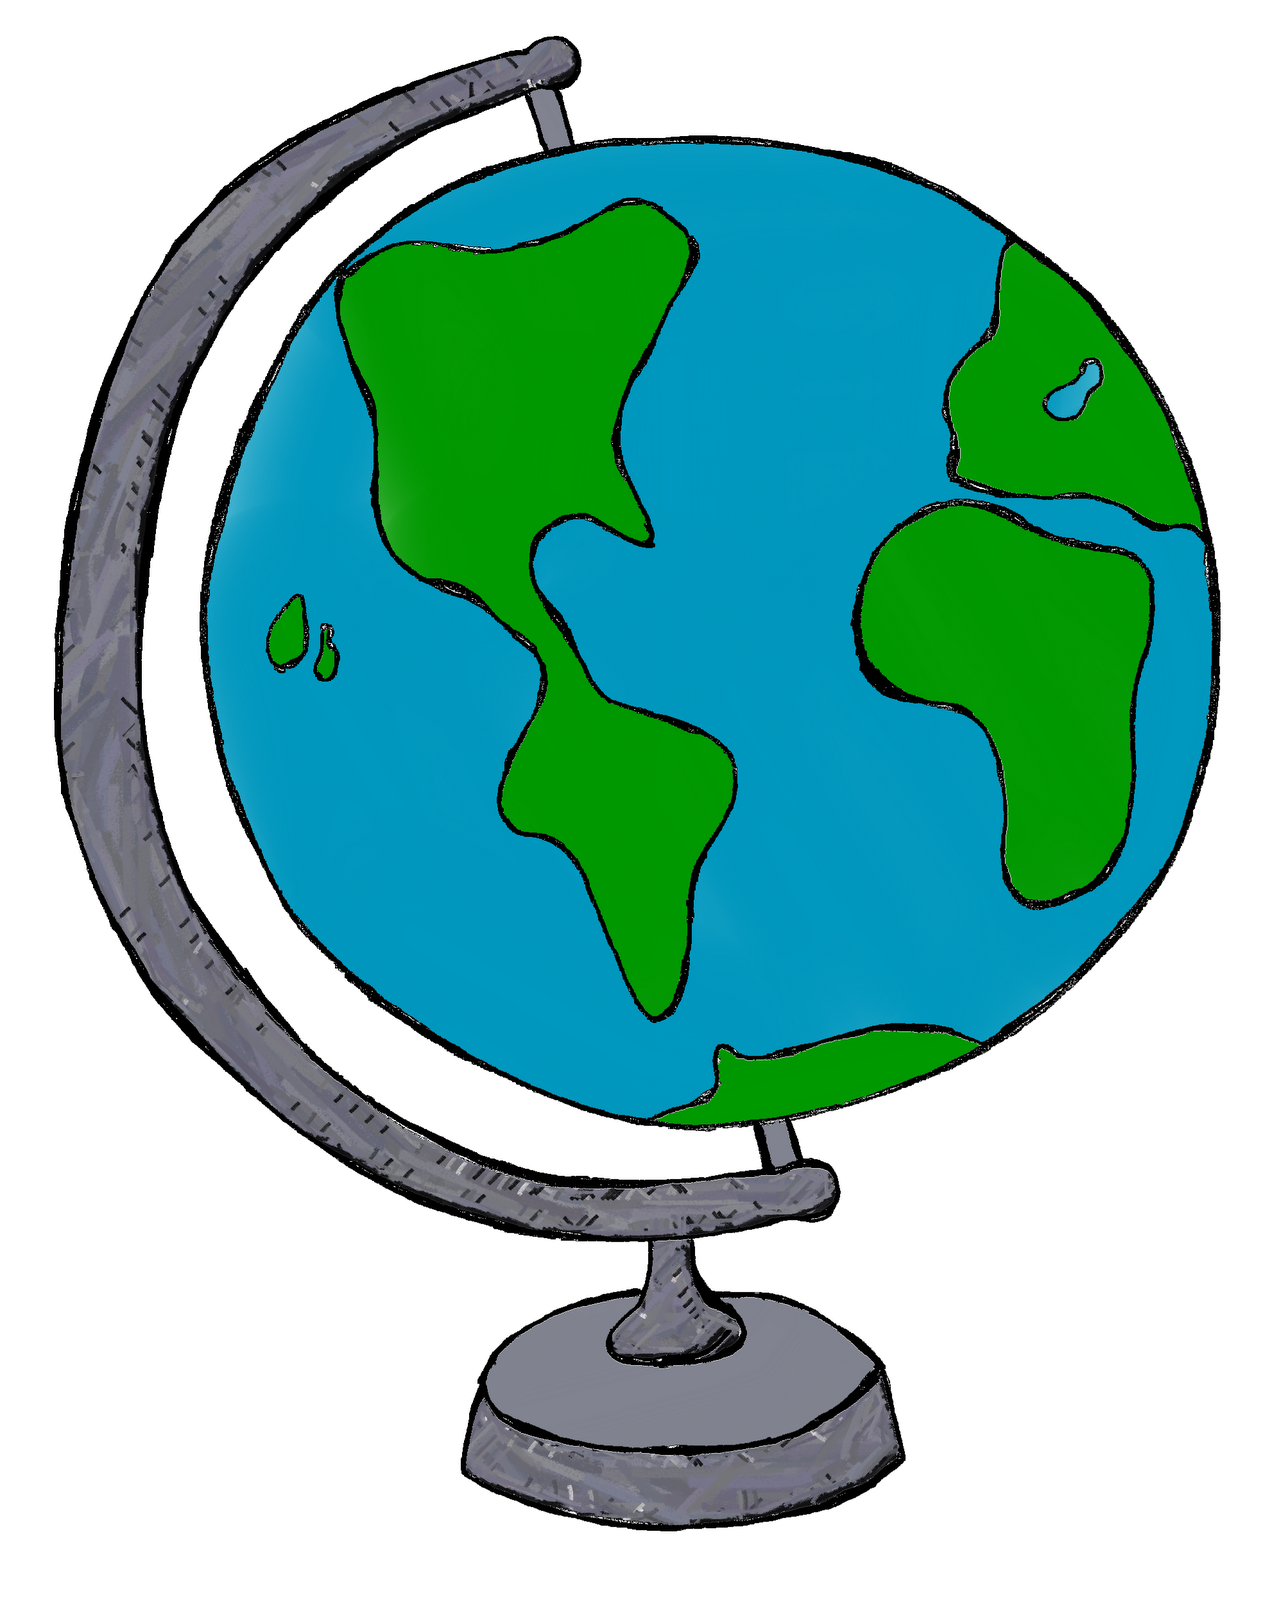 clipart of earth black and white - photo #44